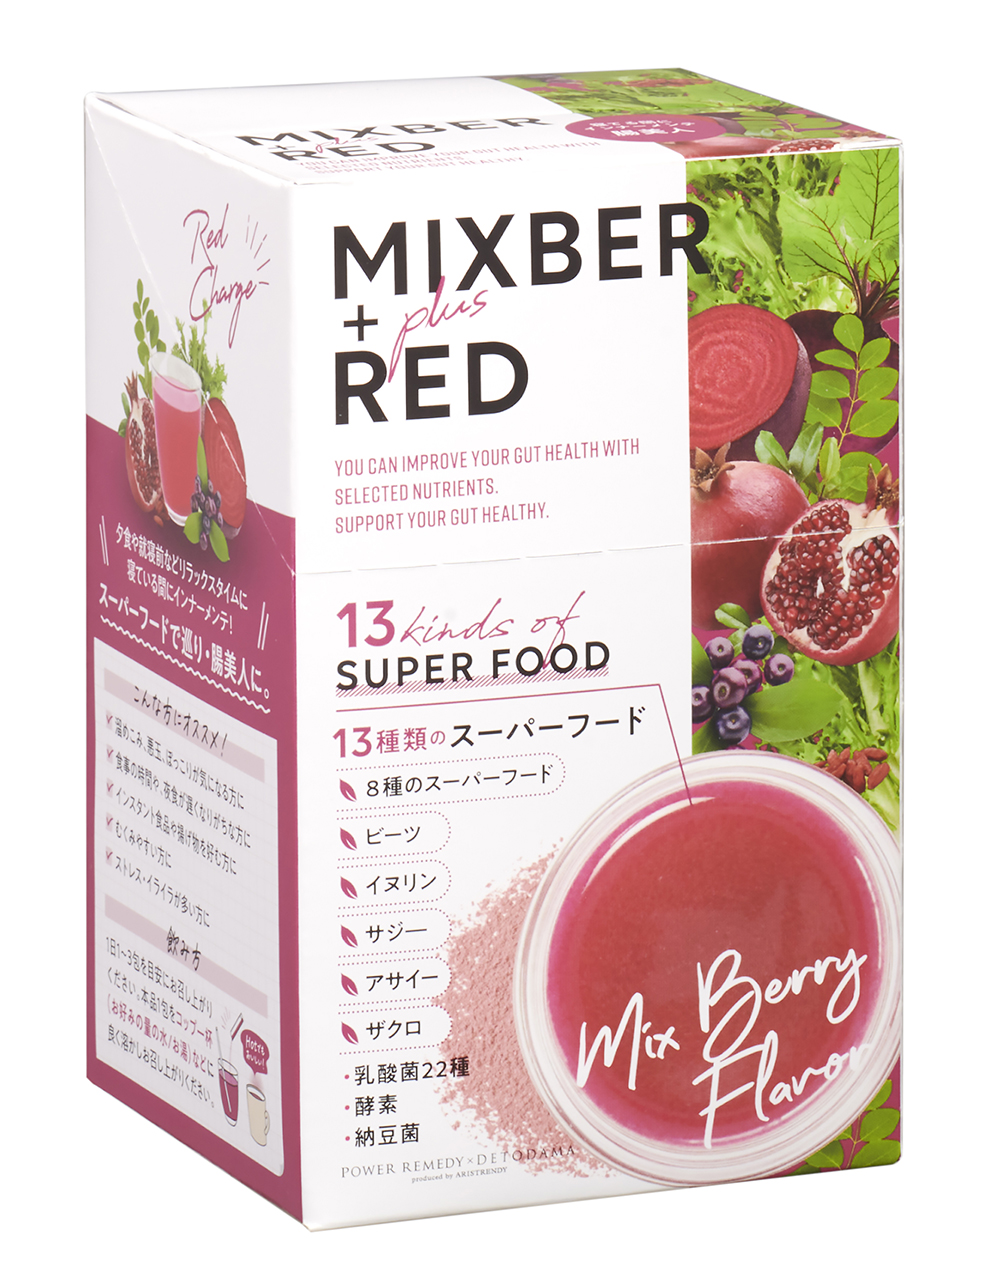 MIXBER ＋plus RED(ﾚｯﾄﾞ)【店販】飲むサラダ